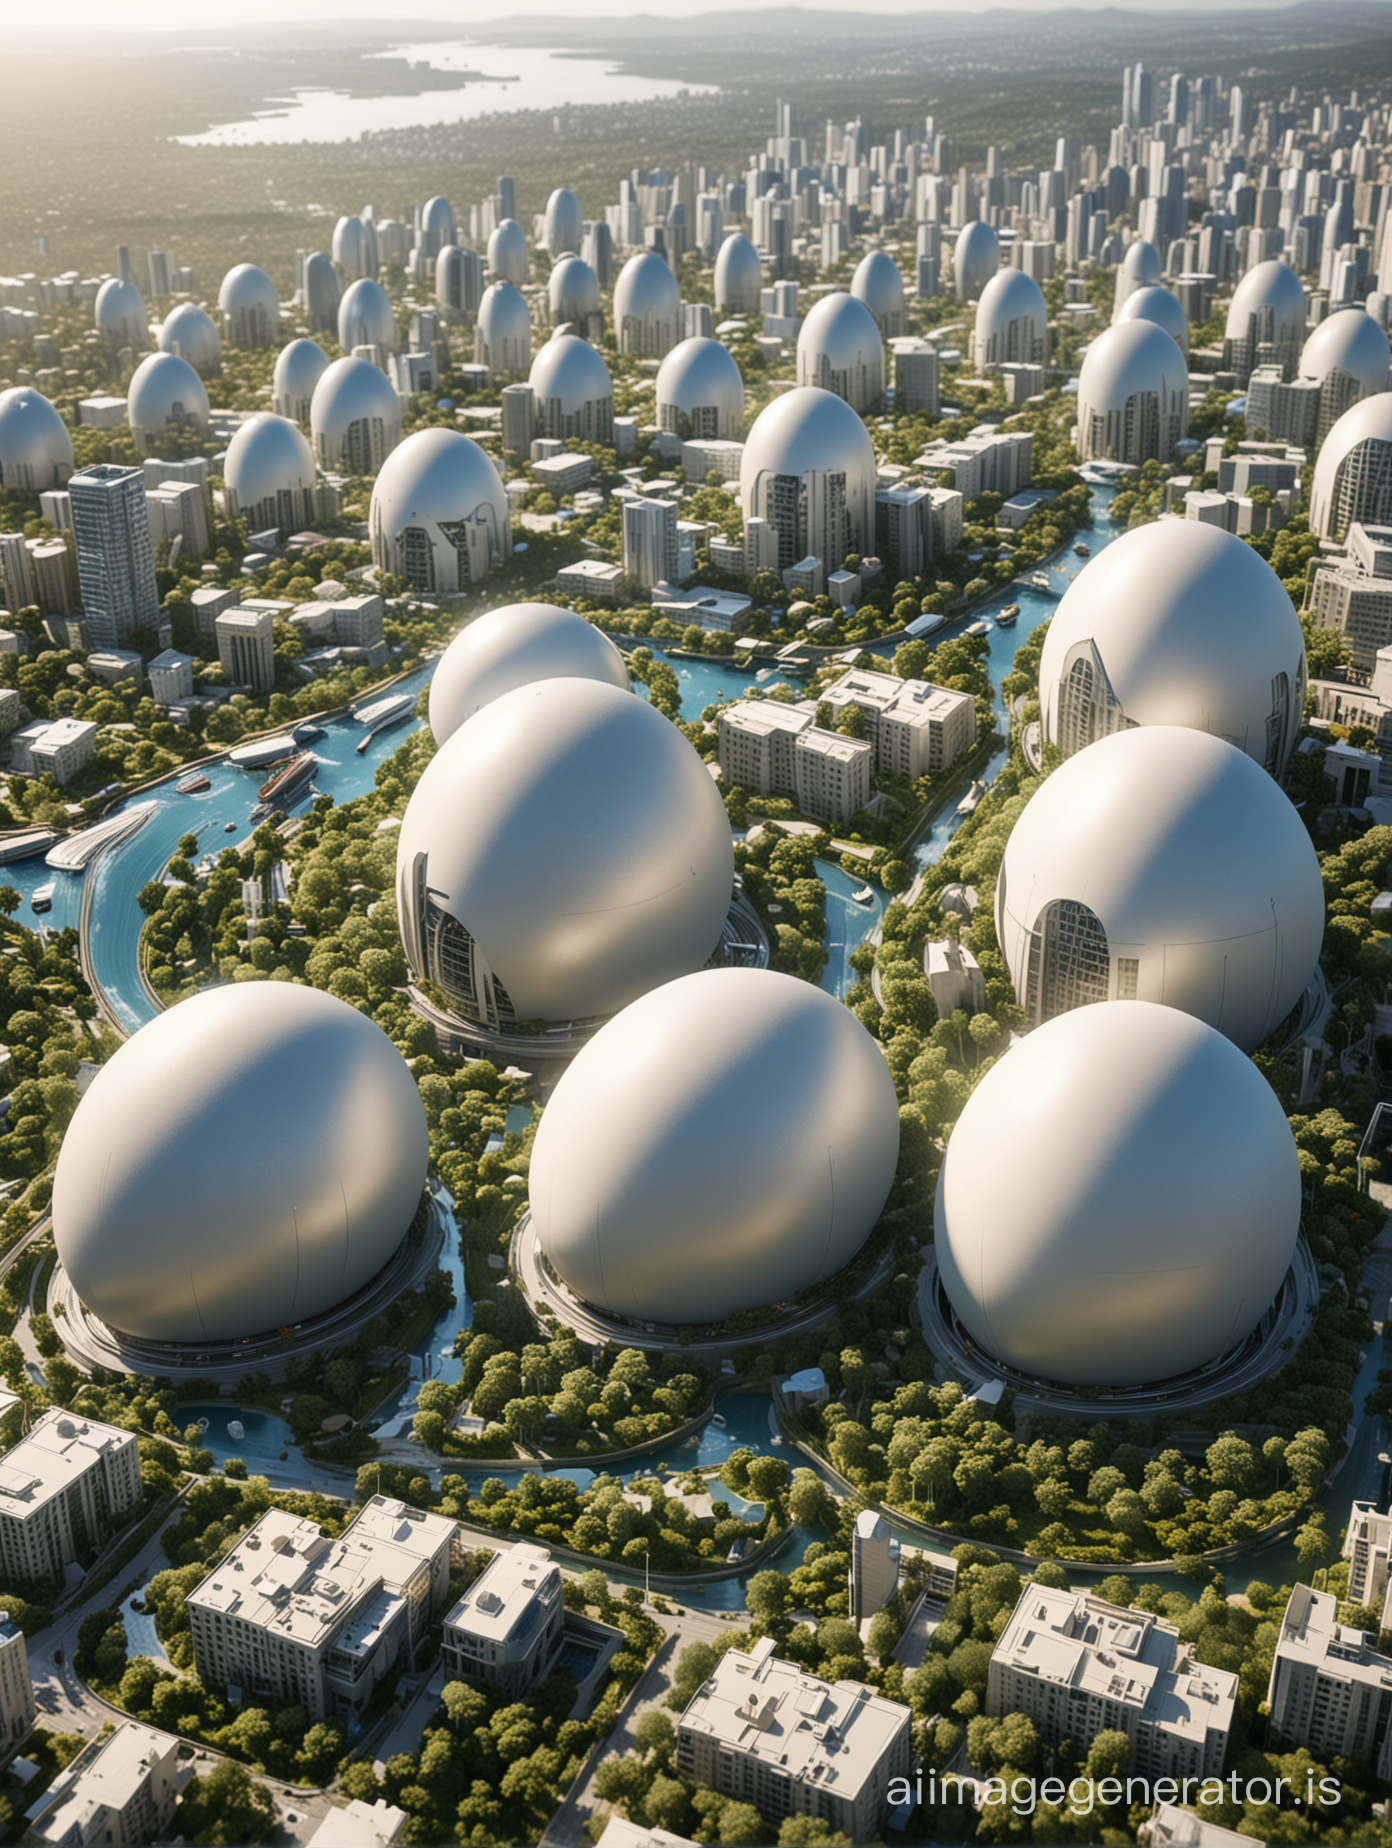 bright_daylight, (sunny_sky), futuristic_science_fiction_city, ((close-up_of_an_energy-efficient_buildbright_daylight, (sunny_sky), futuristic_science_fiction_city, ((close-up_of_an_energy-efficient_building_shaped_like_an_egg)), organically_shaped_buildings, jungle, ((exotic_plants)), (river), photorealistic, Hyper Realistic, (masterpiece), High_resolution, very_detailed, sharp_focus, 8k.,SD 1.5,
ing_shaped_like_an_egg)), organically_shaped_buildings, jungle, ((exotic_plants)), (river), photorealistic, Hyper Realistic, (masterpiece), High_resolution, very_detailed, sharp_focus, 8k.,SD 1.5,
